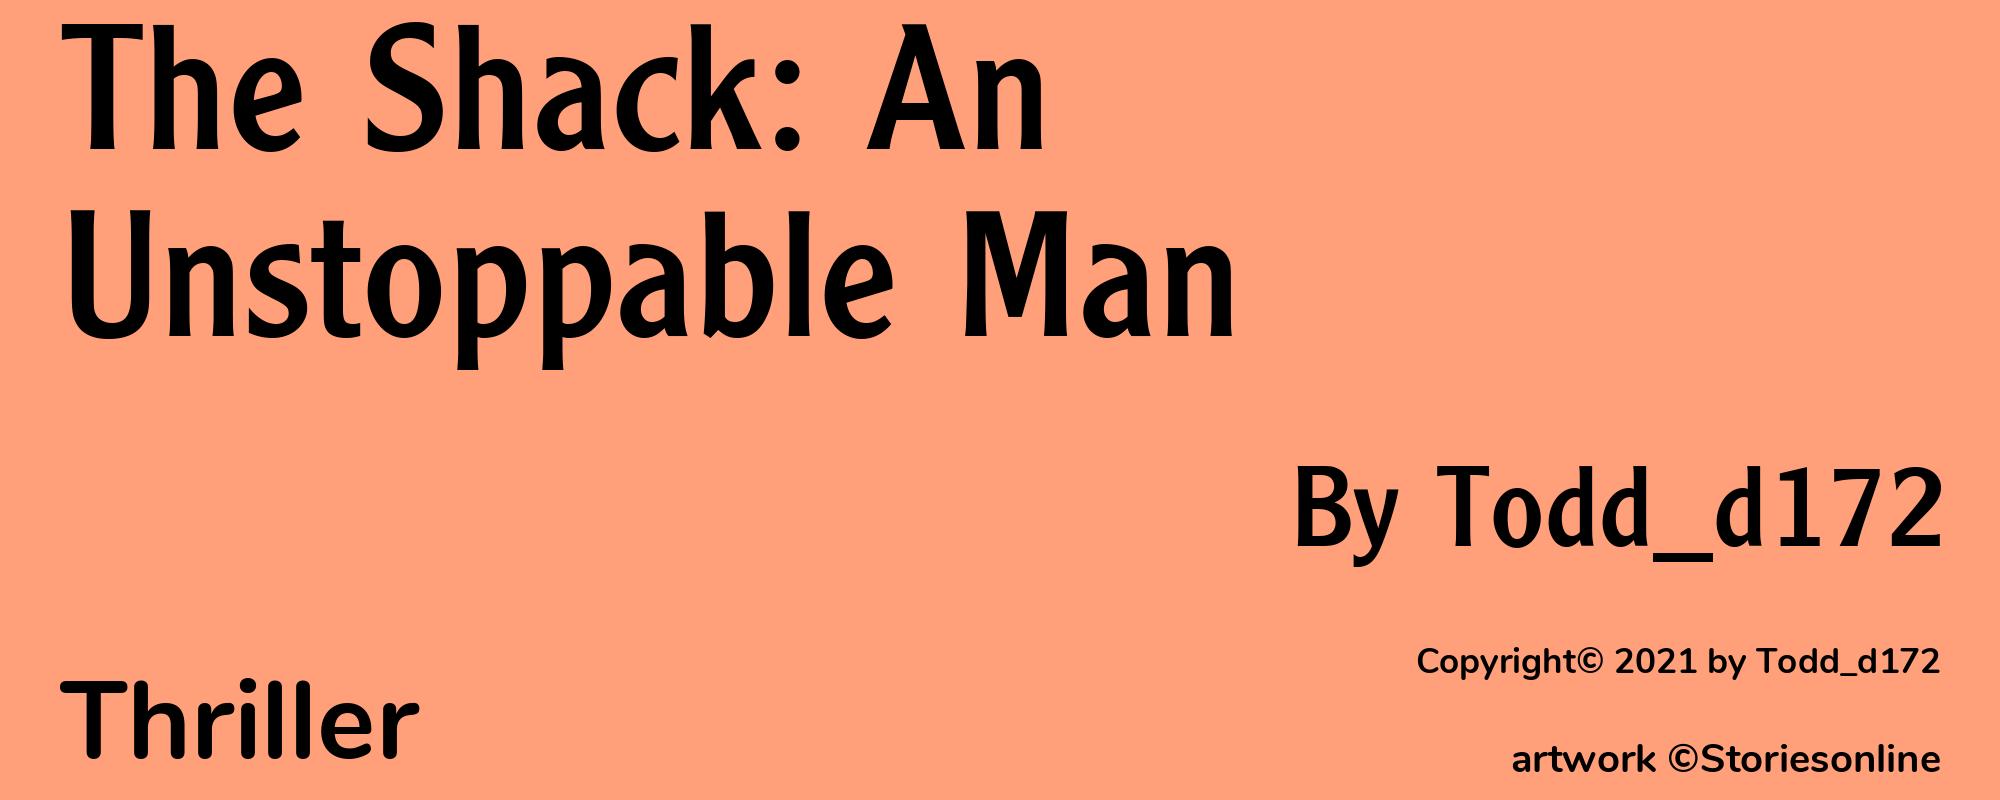 The Shack: An Unstoppable Man - Cover